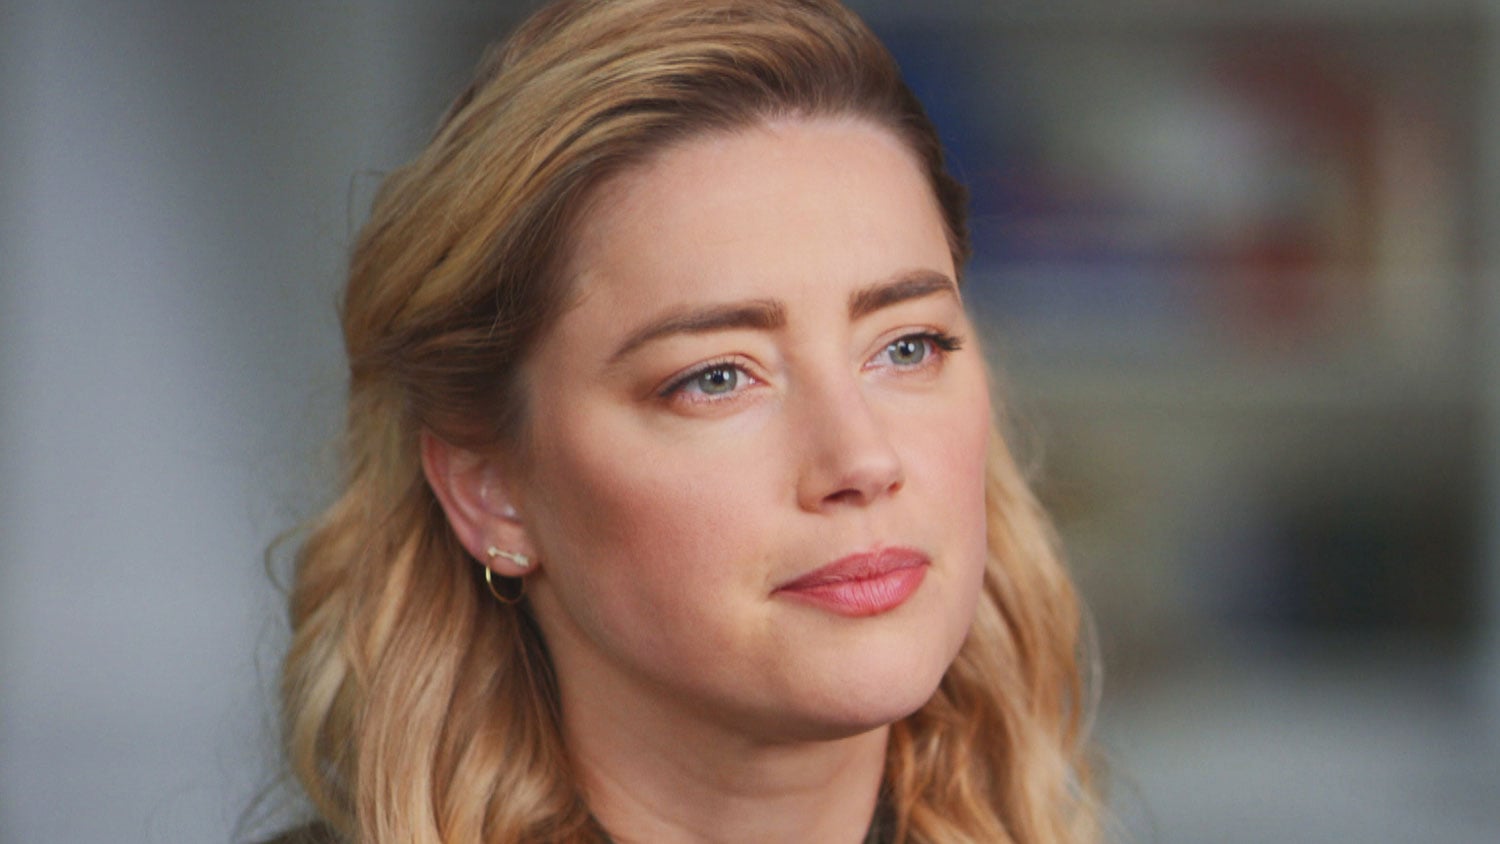 Amber-Heard-Dateline-Interview-Has-Second-Smallest-Audience-Since-November